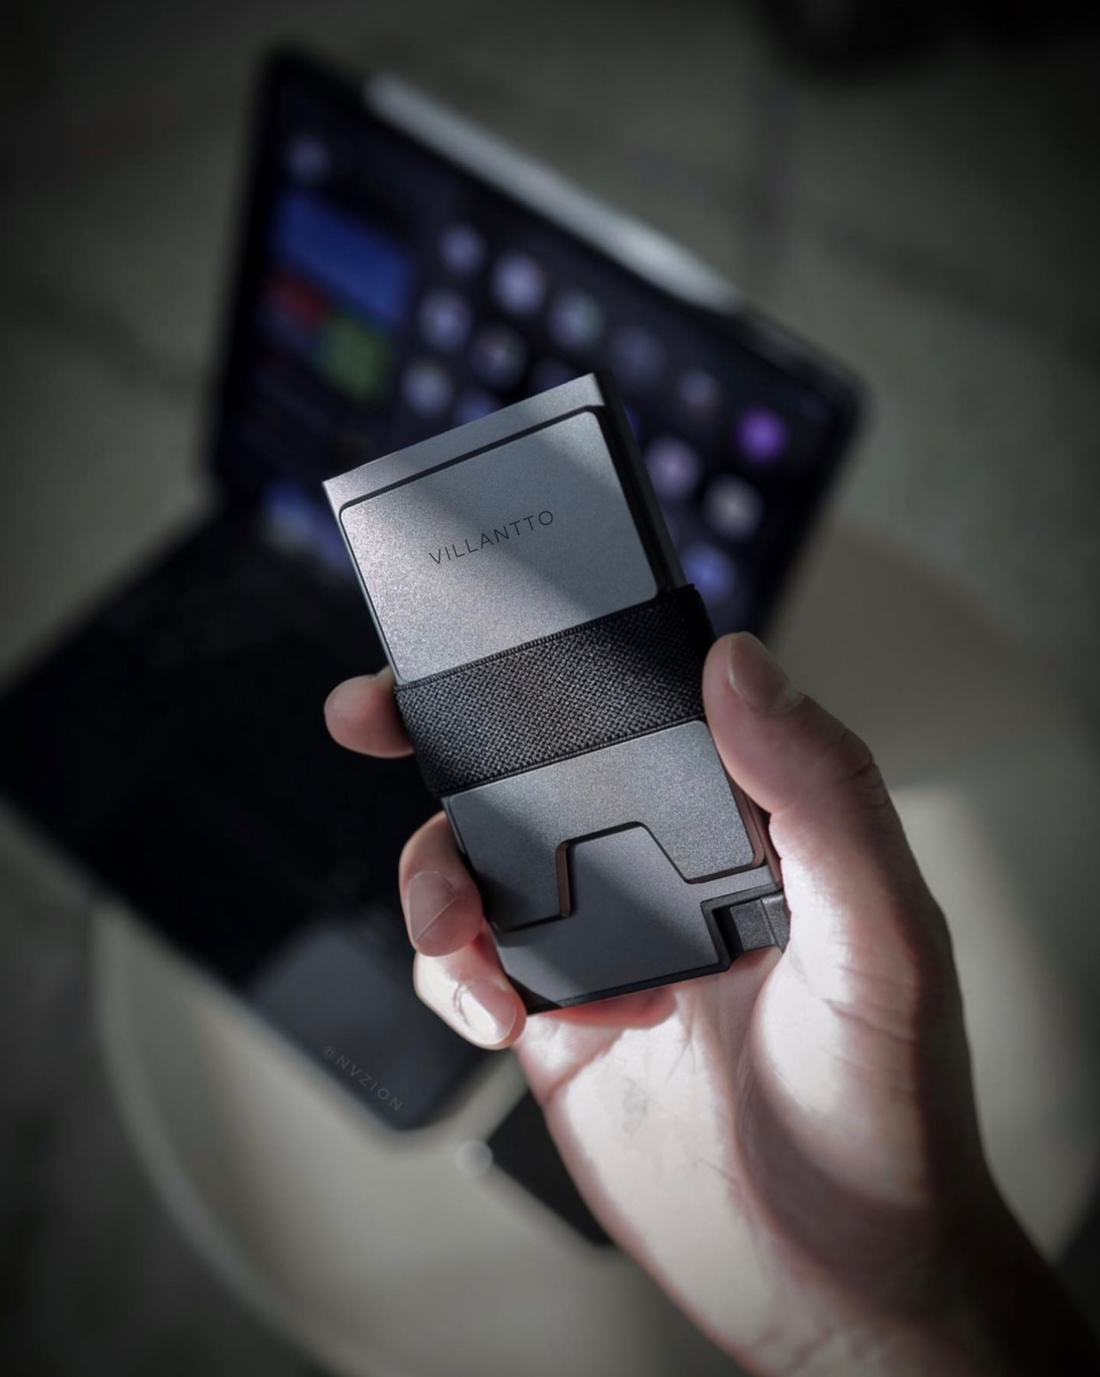 Why You Need a Villantto's Smart Wallet?